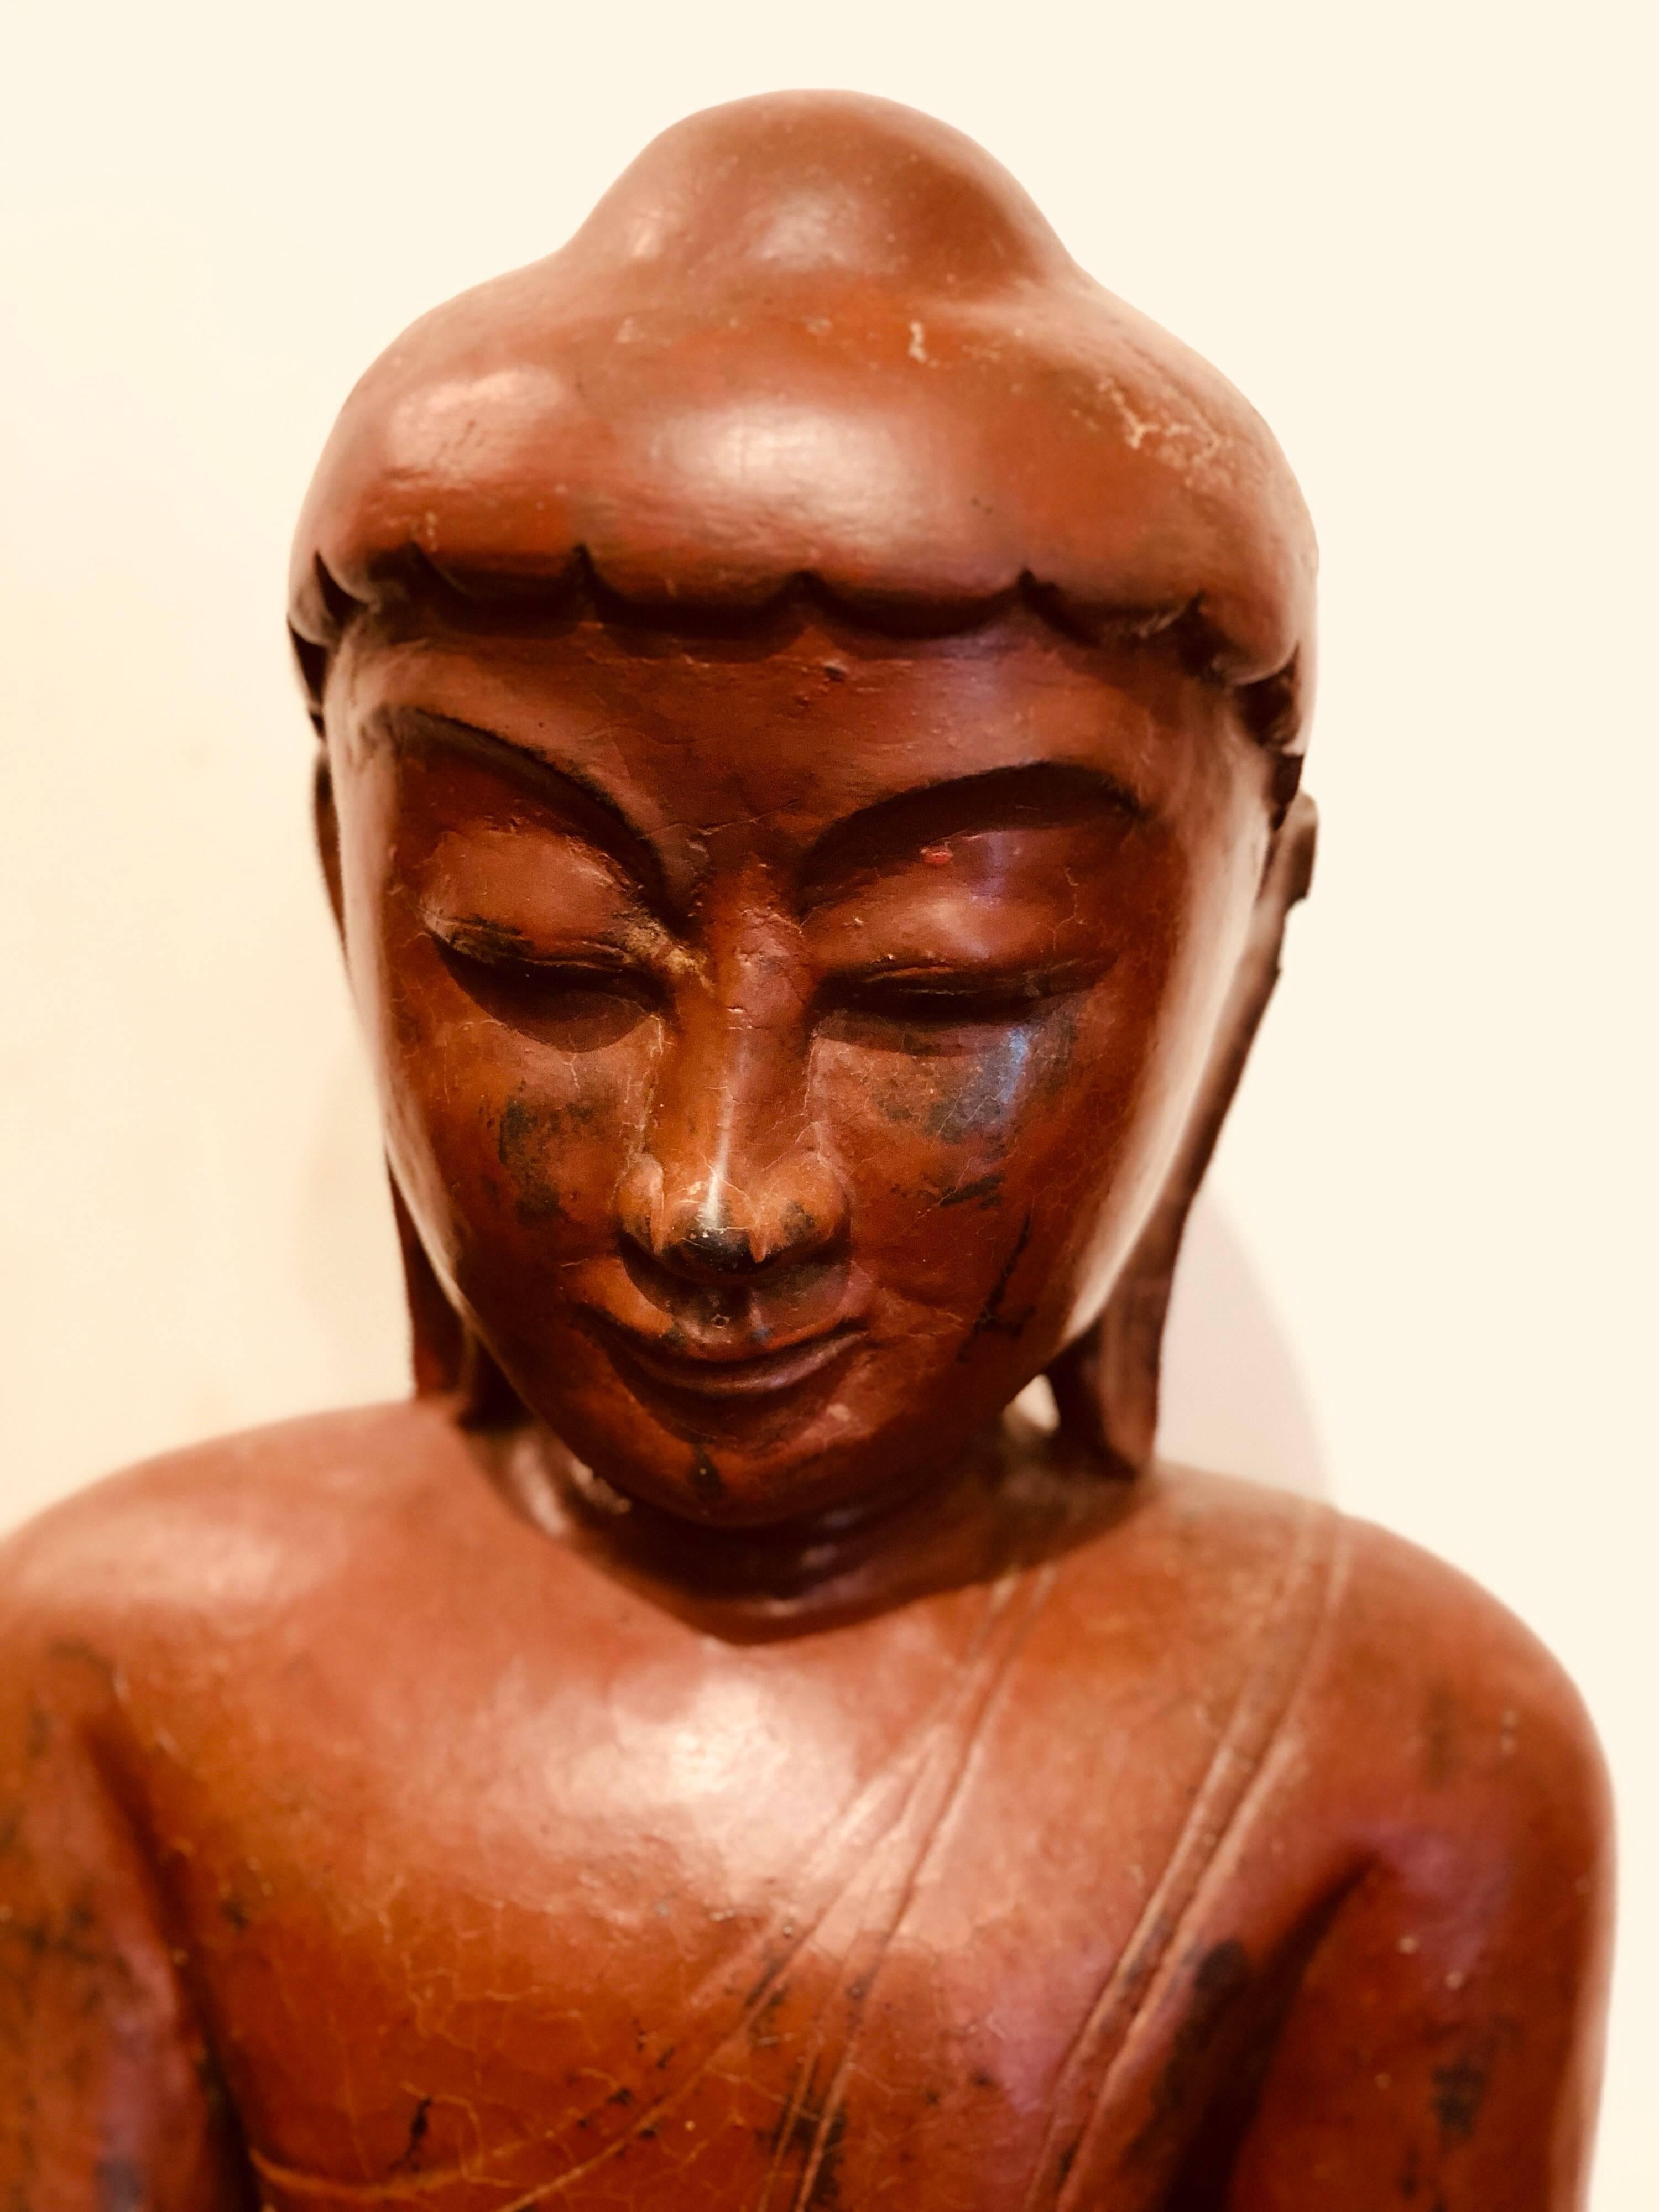 This unique red Buddha was made in Burma in the 19th century.
It is deep red with a wonderful antique texture to the material. It is made from Papier-mâché which in the 1800s was more expensive than wood to carve a Buddha from.
We love this piece